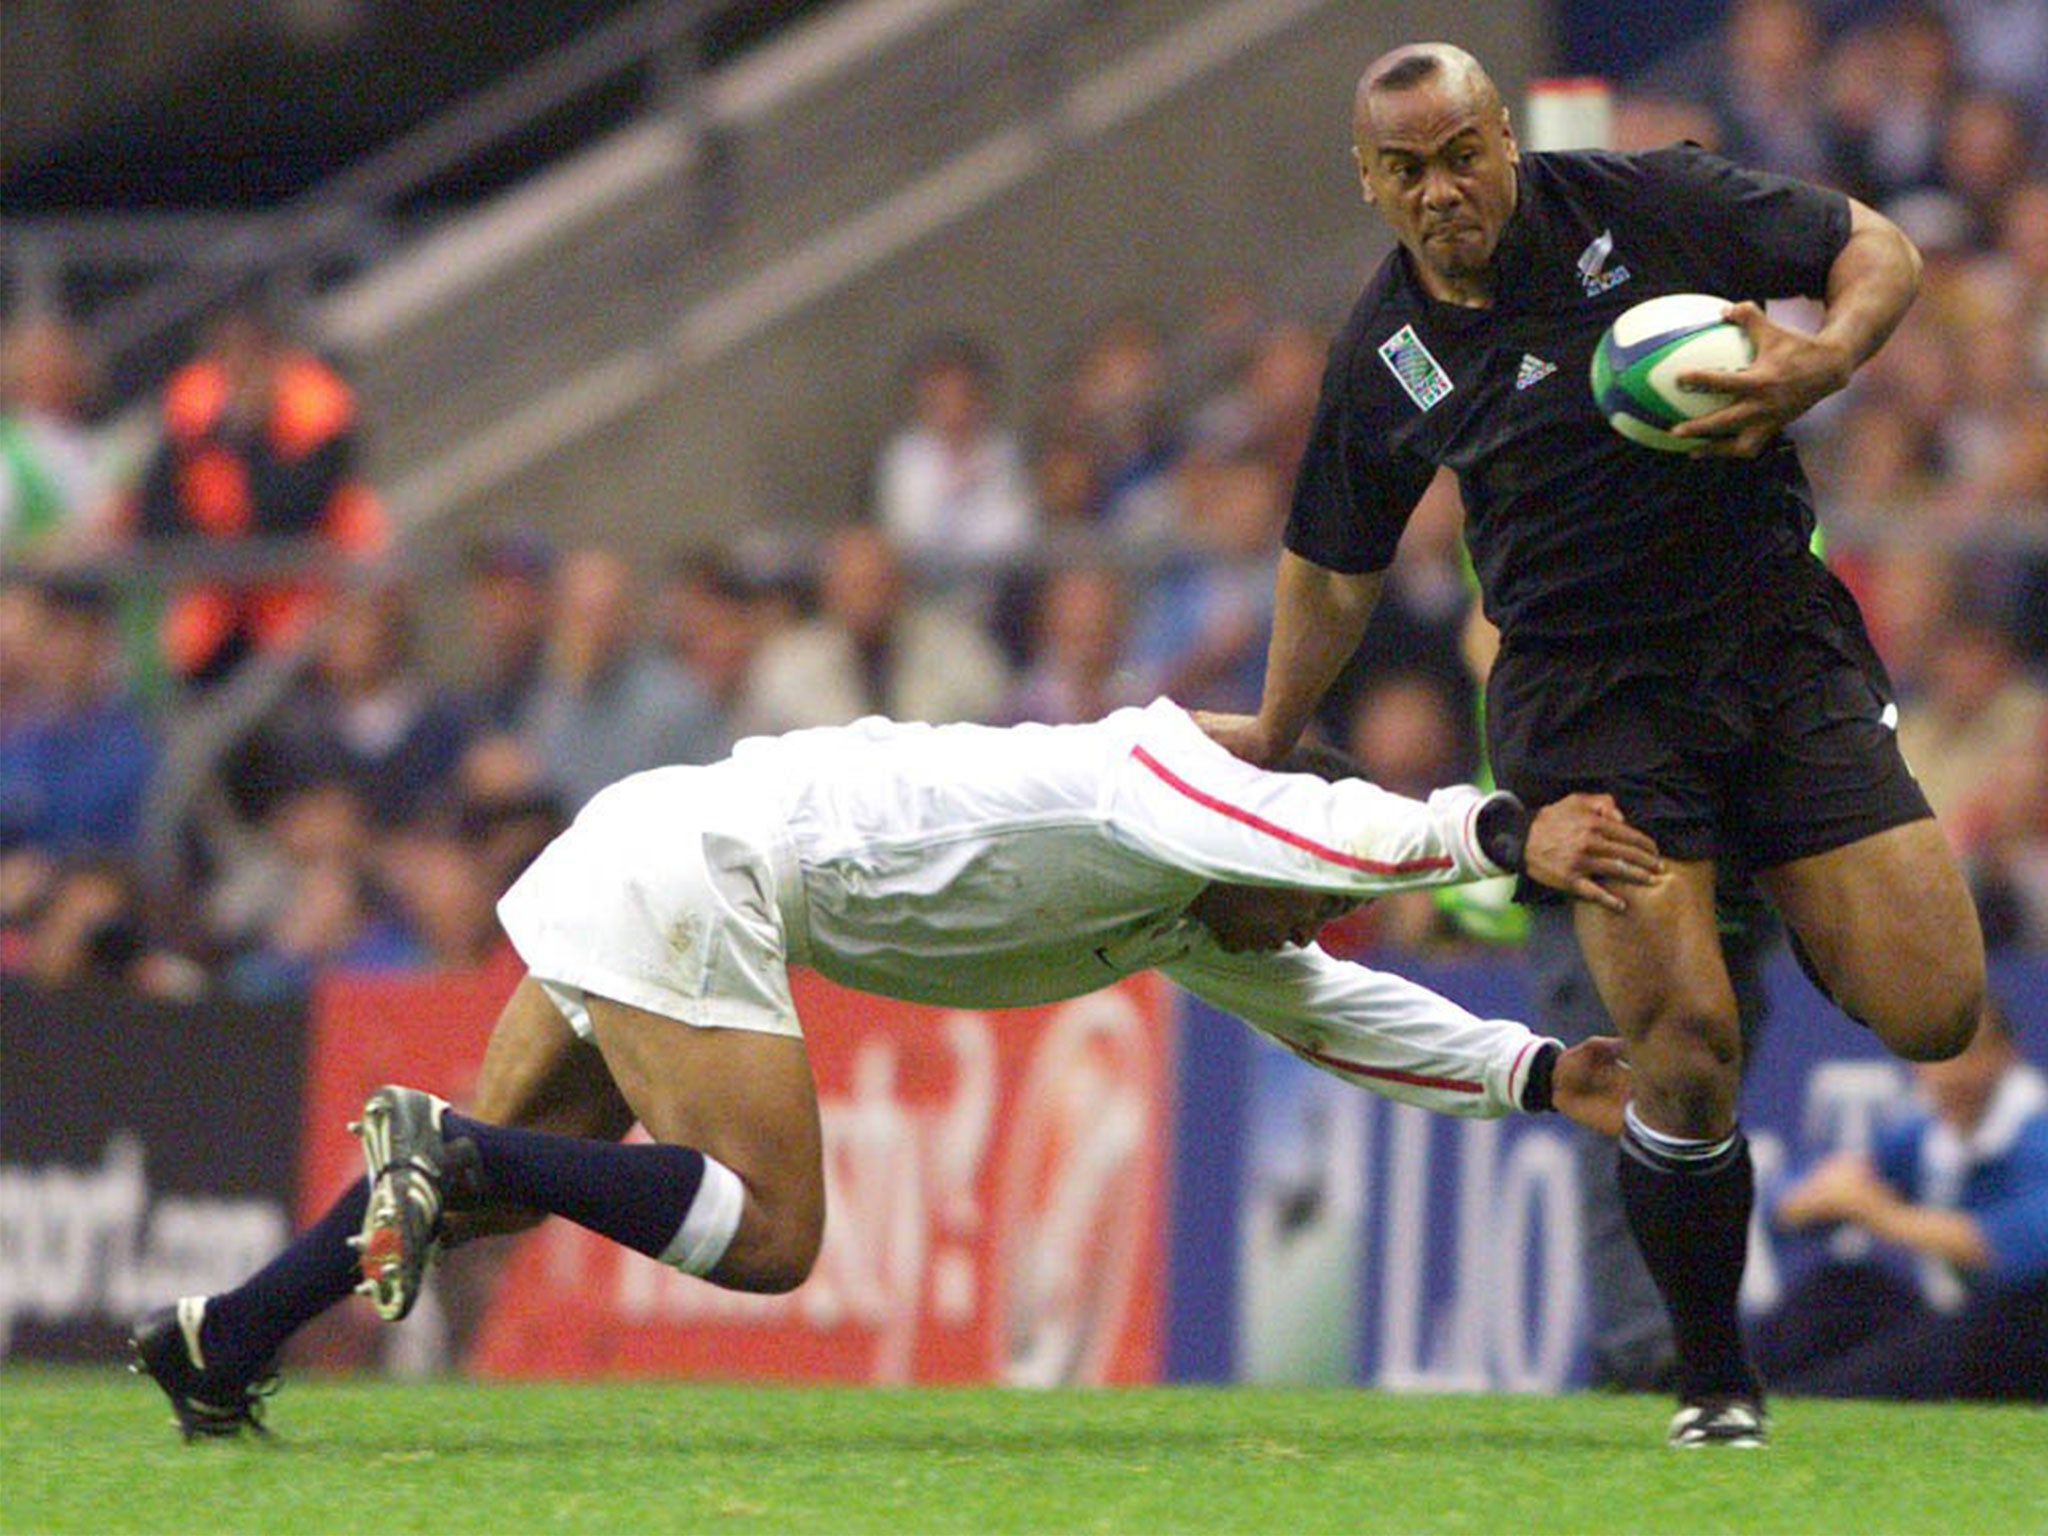 Jonah Lomu overpowers England's Jeremy Guscott in the 1999 World Cup